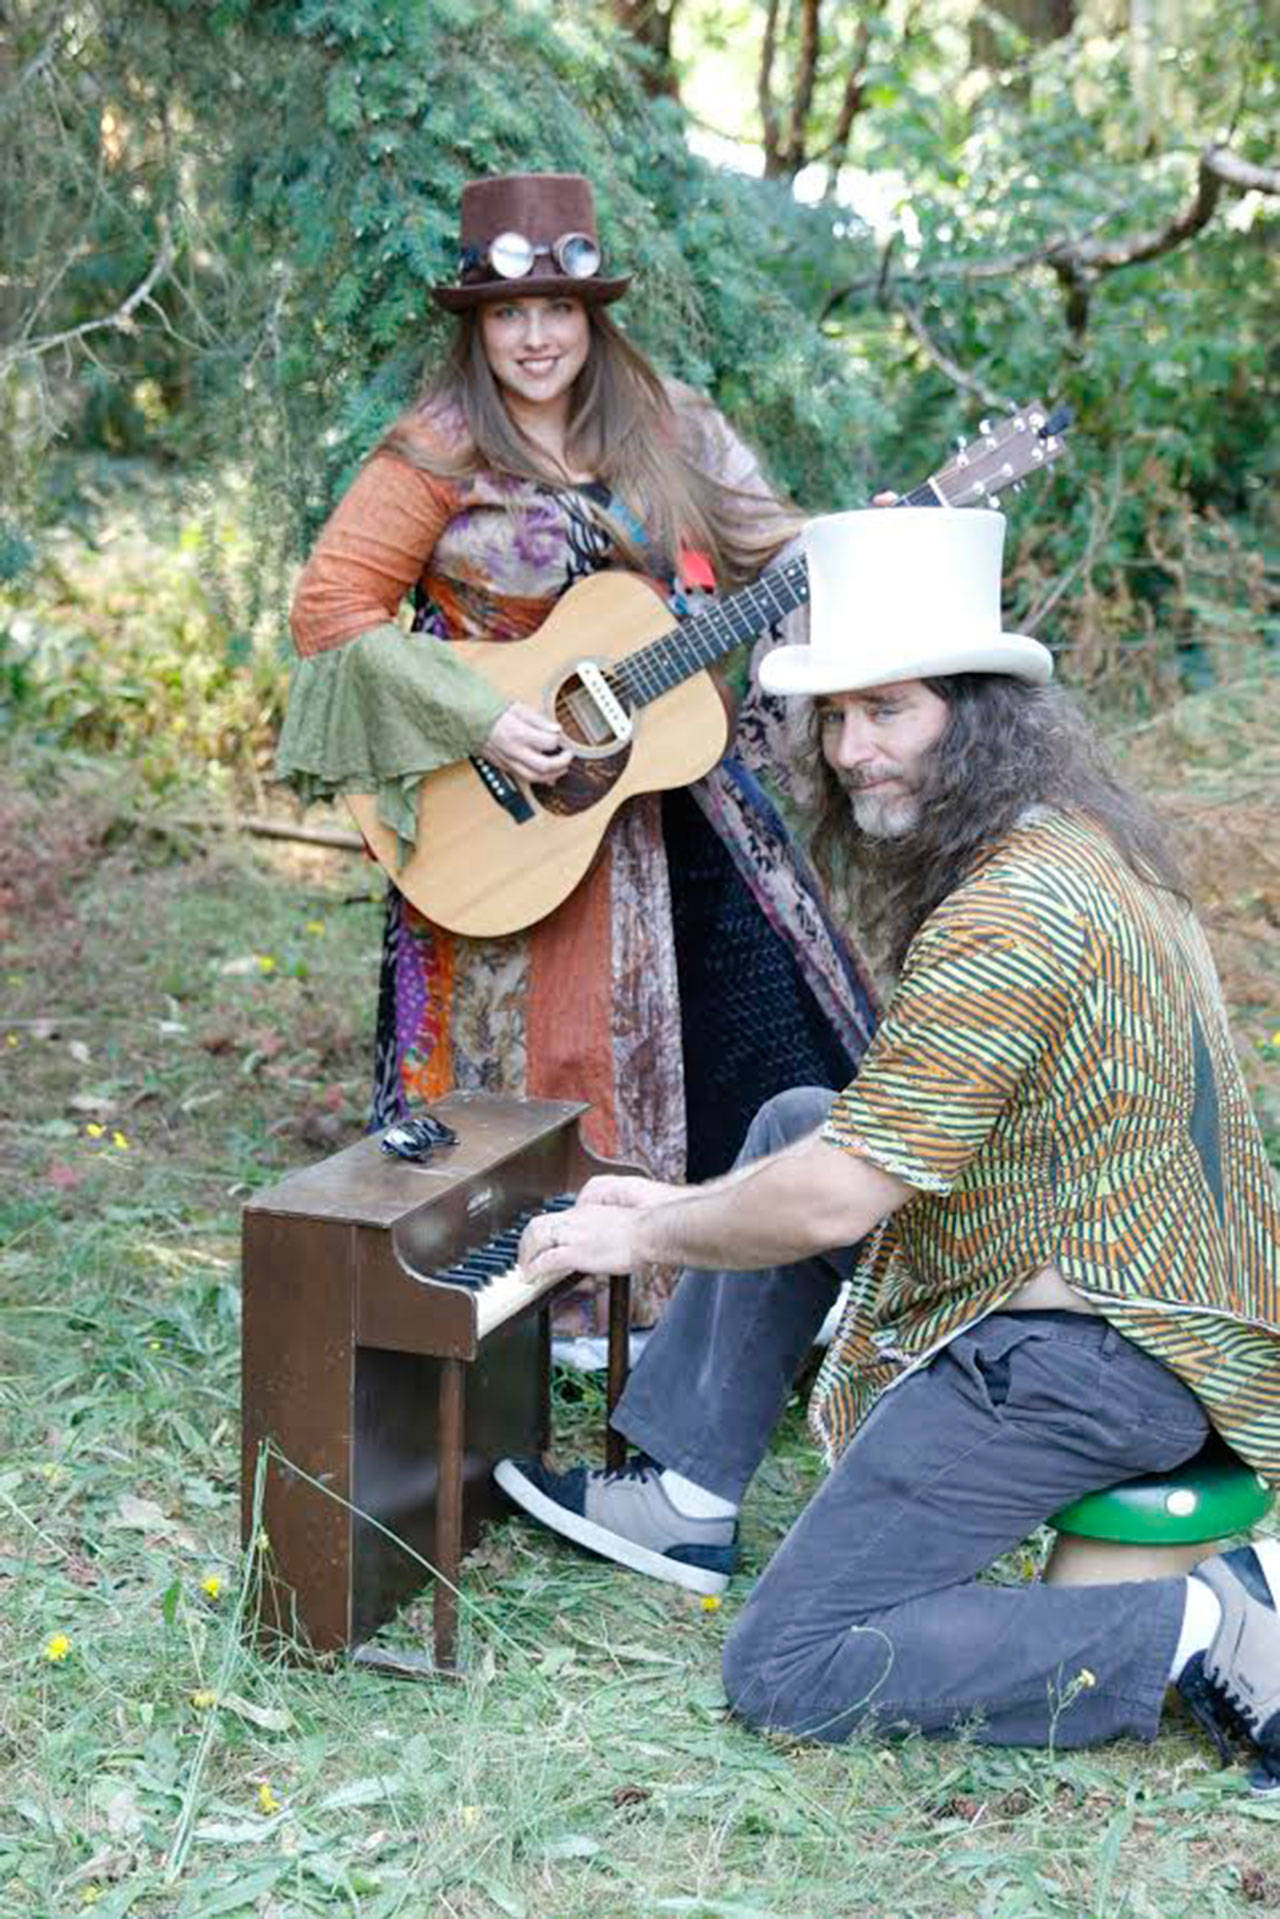 Bread & Gravy band members Stephanie Doenges, left, and Jess Doenges will be a few of the lead performers at the upcoming Community Variety Show debut Tuesday at the Old Dungeness Schoolhouse at 2781 Towne Road in Sequim.